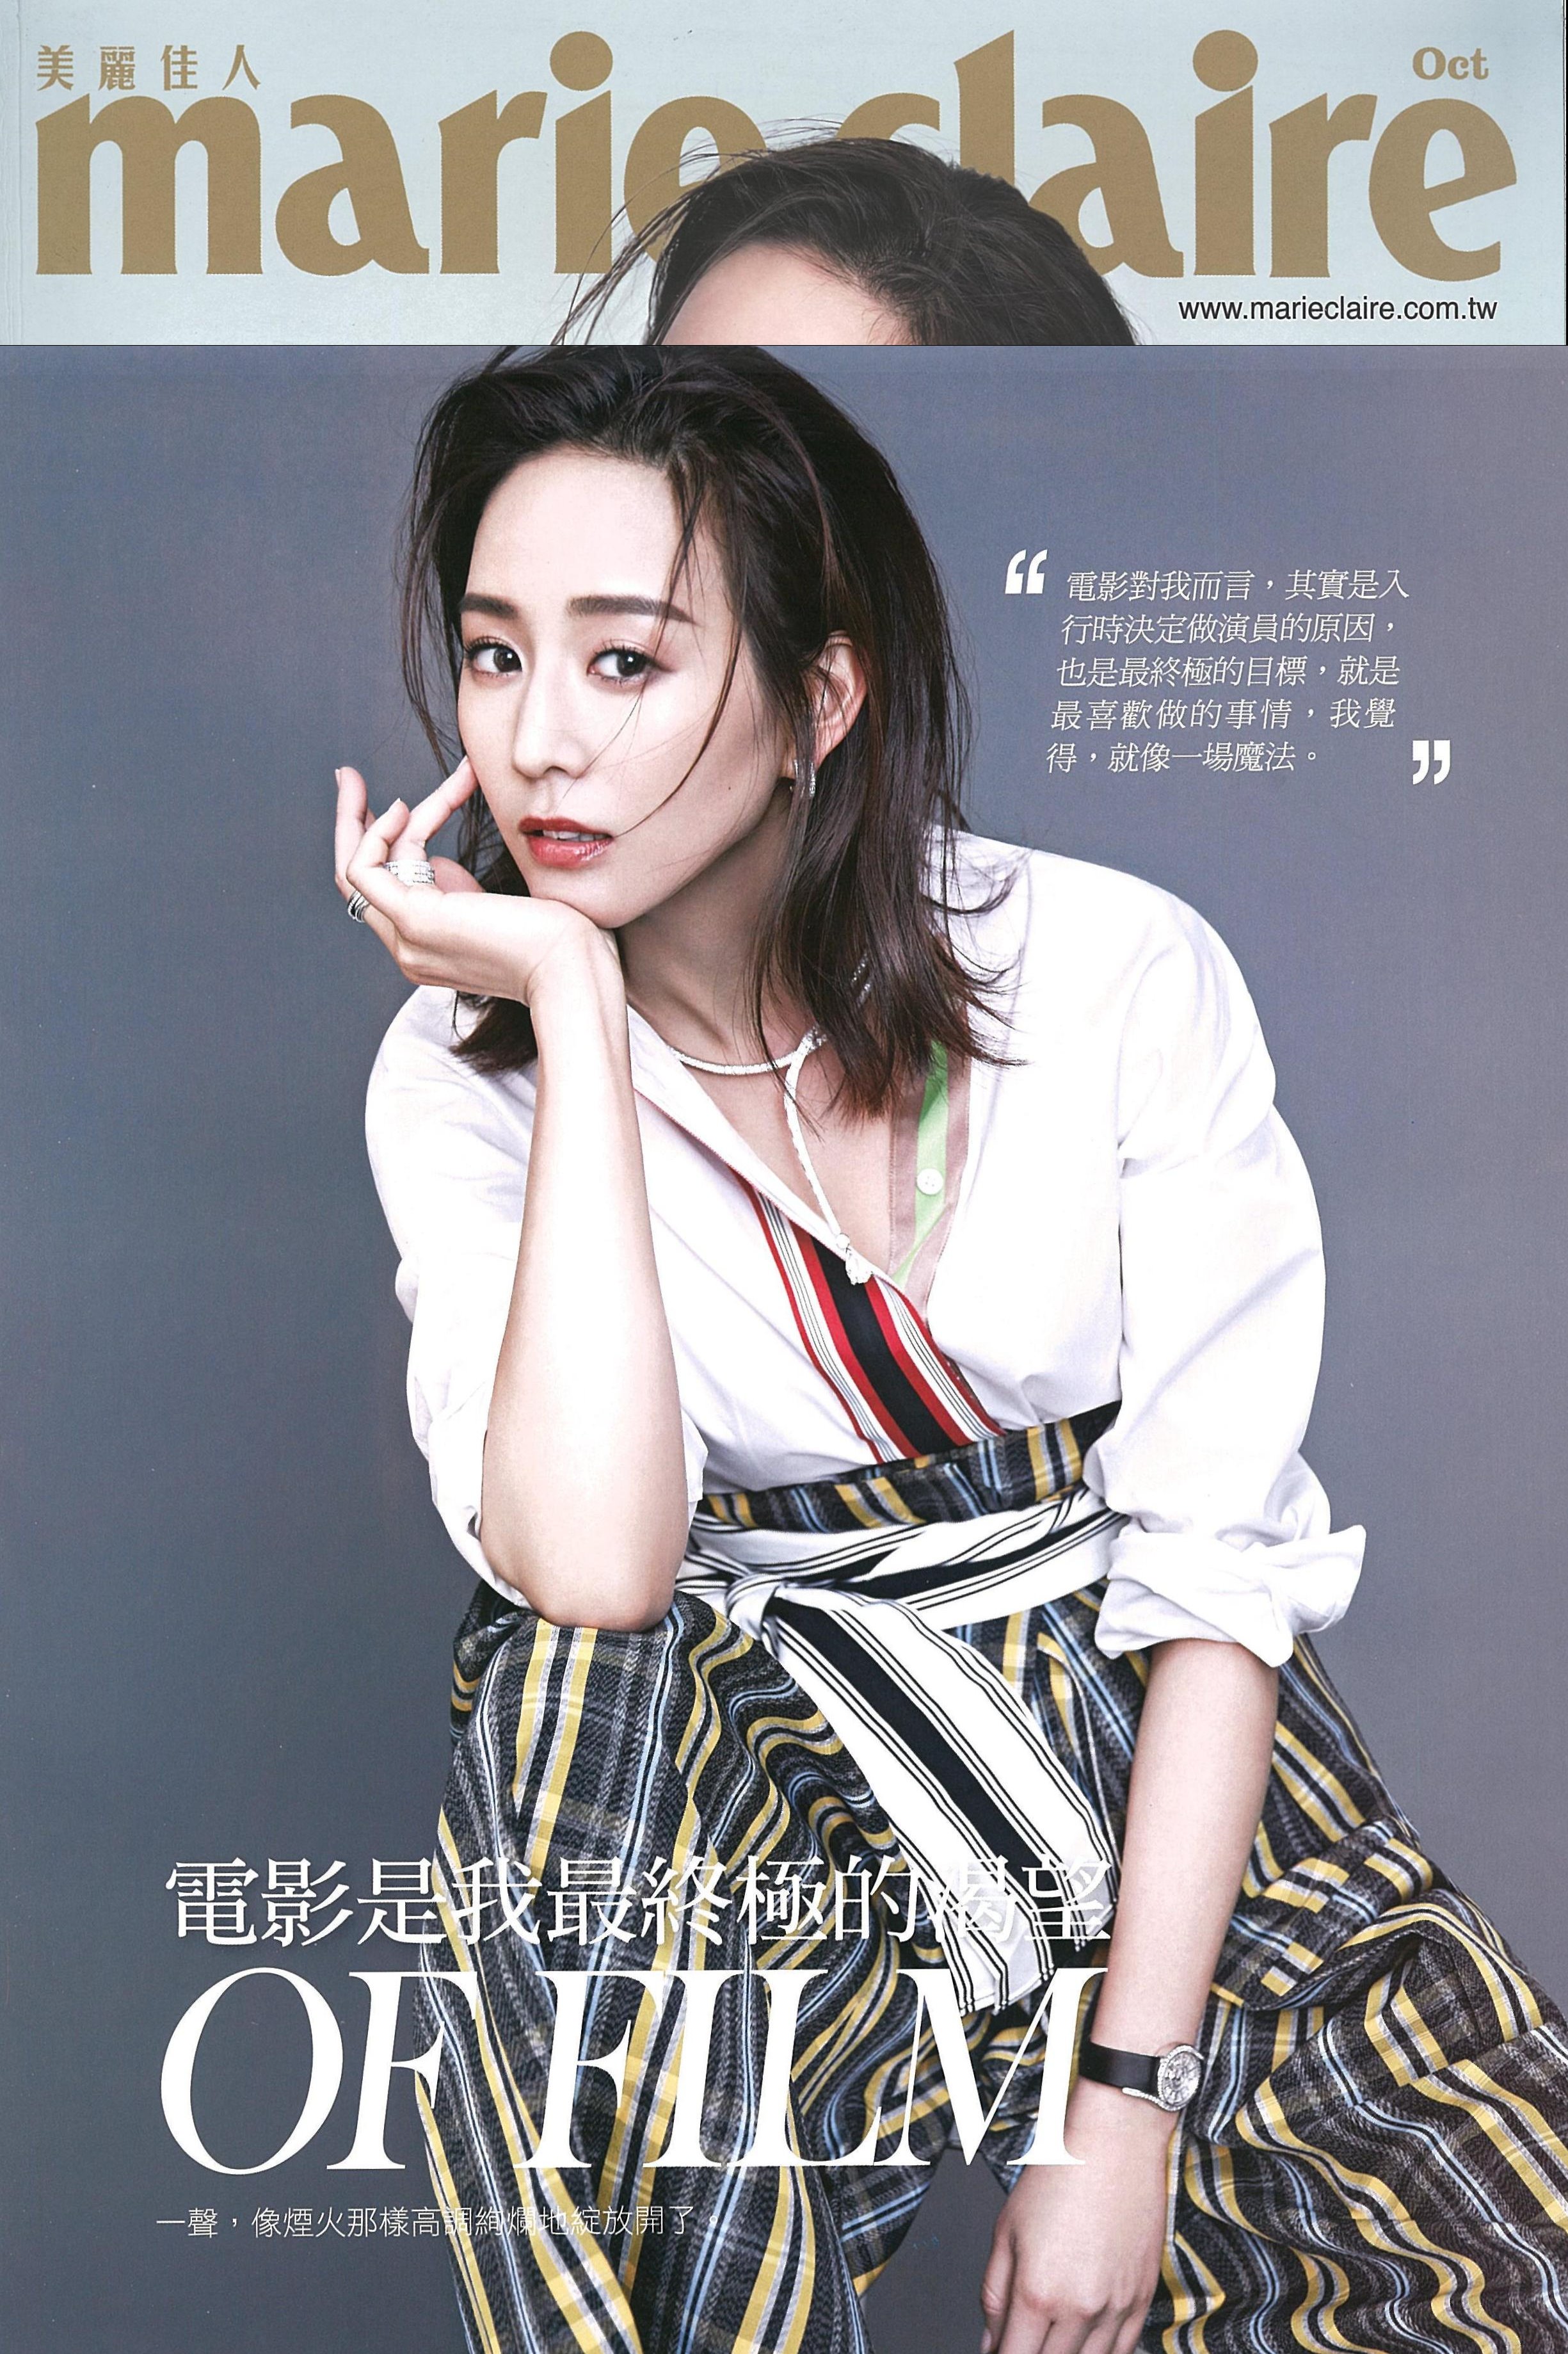 Taiwan_marie claire SP_October_DVF(2).jpg